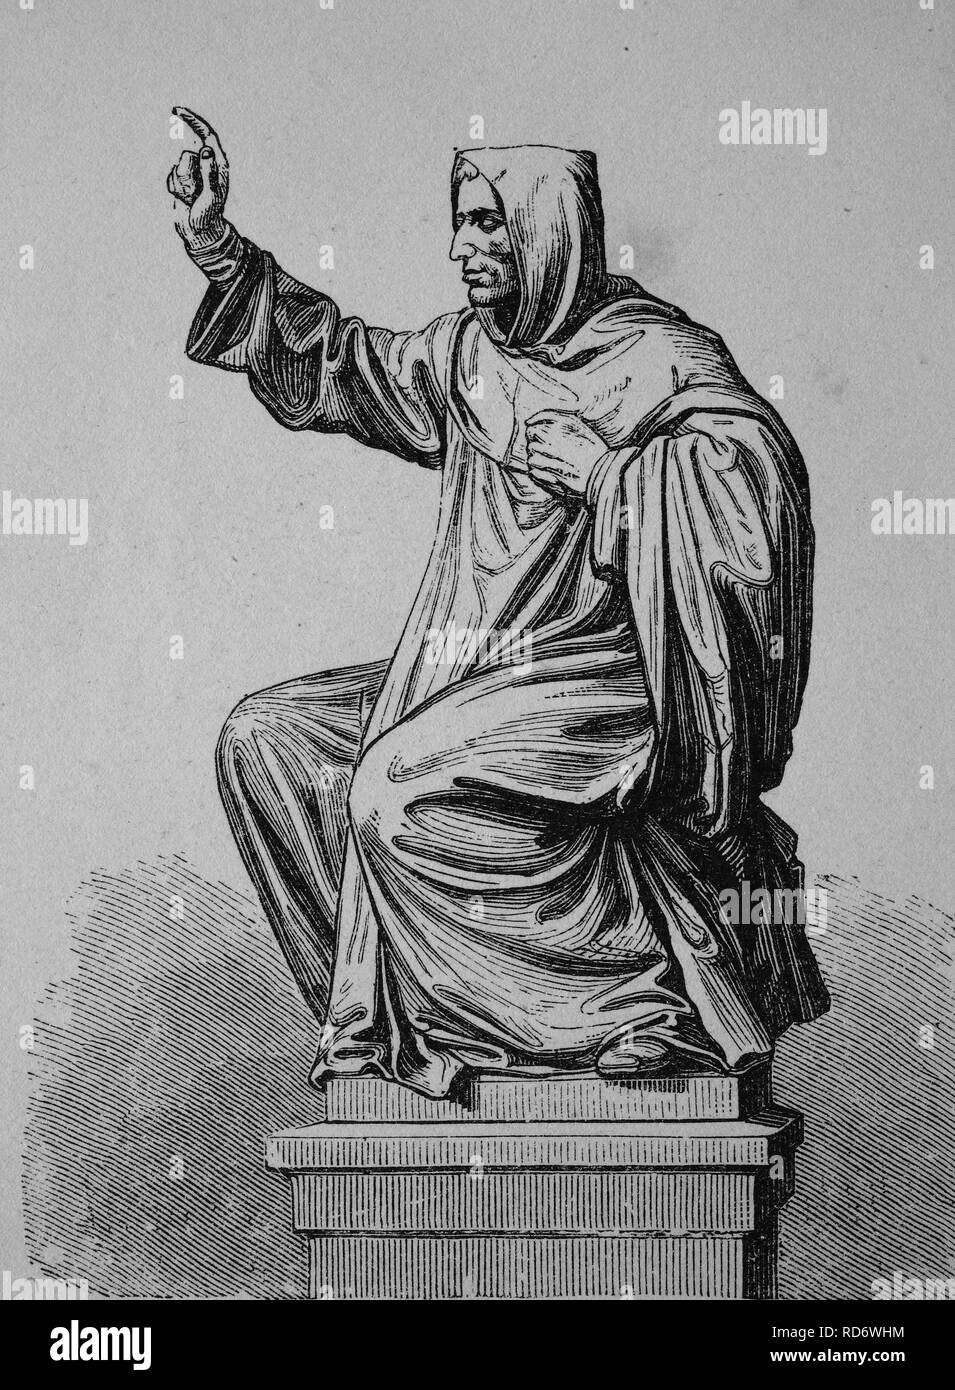 Statue of Girolamo Savonarola, part of the Luther Monument in Worms, Rhineland-Palatinate, Germany, woodcut from 1880 Stock Photo